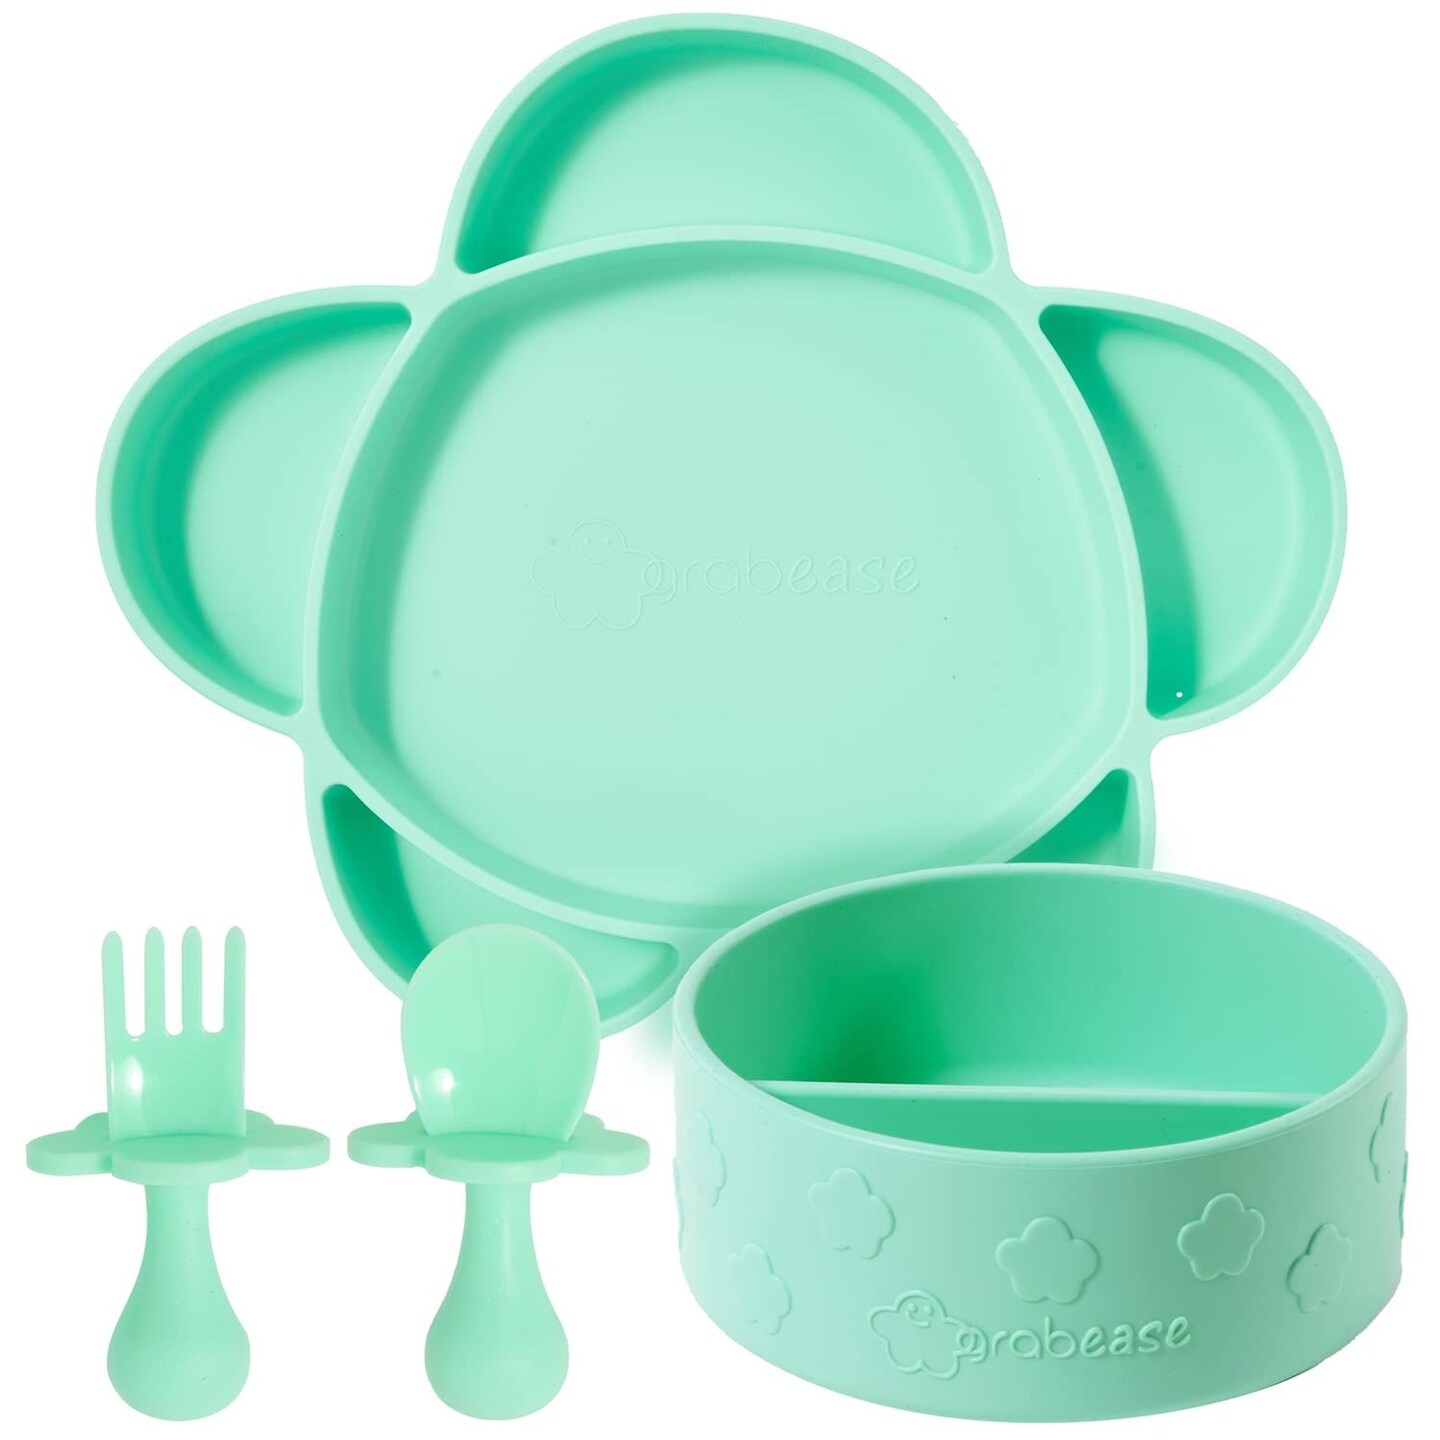 Grabease Baby Plates and Bowls Set - Essential Baby-Led Weaning Supplies for Portion Control and Self-Feeding - Suction Bottoms 4 Piece Set, BPA and Phthalates-Free, Mint